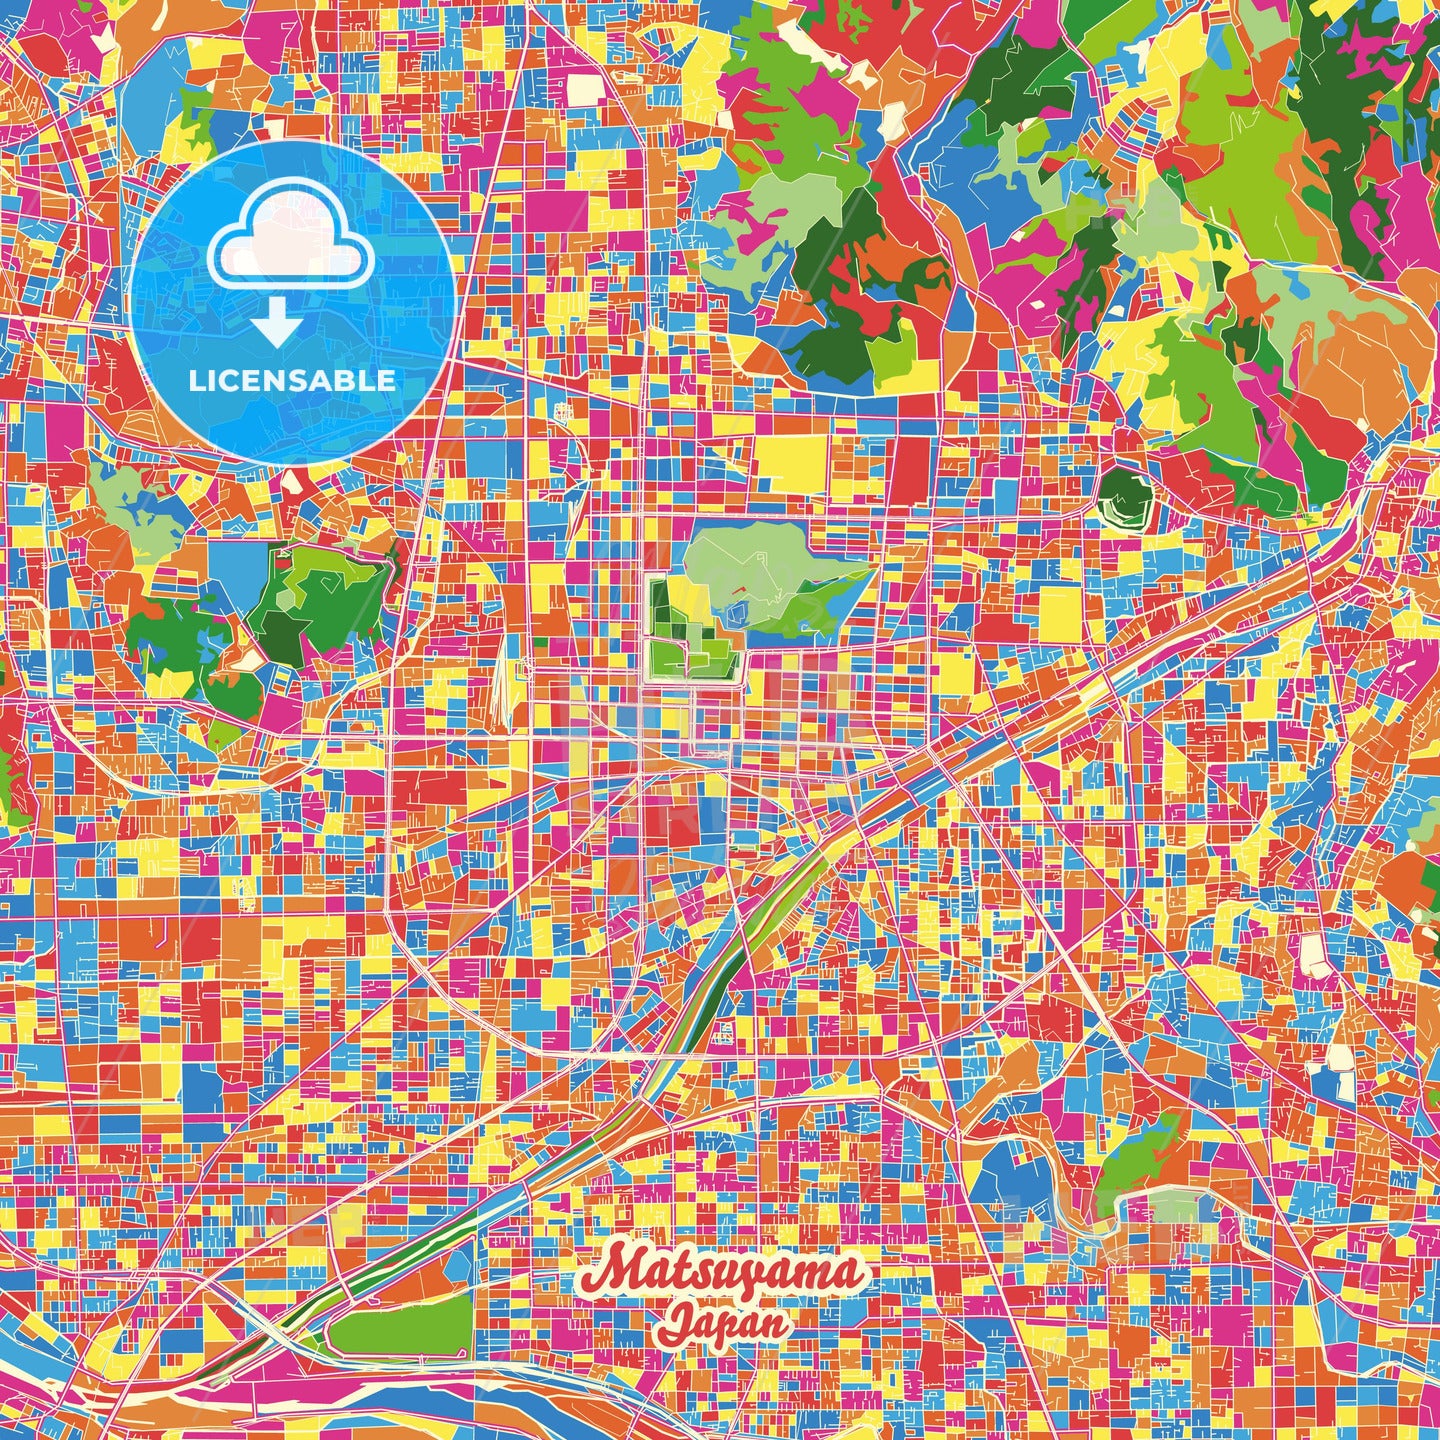 Matsuyama, Japan Crazy Colorful Street Map Poster Template - HEBSTREITS Sketches